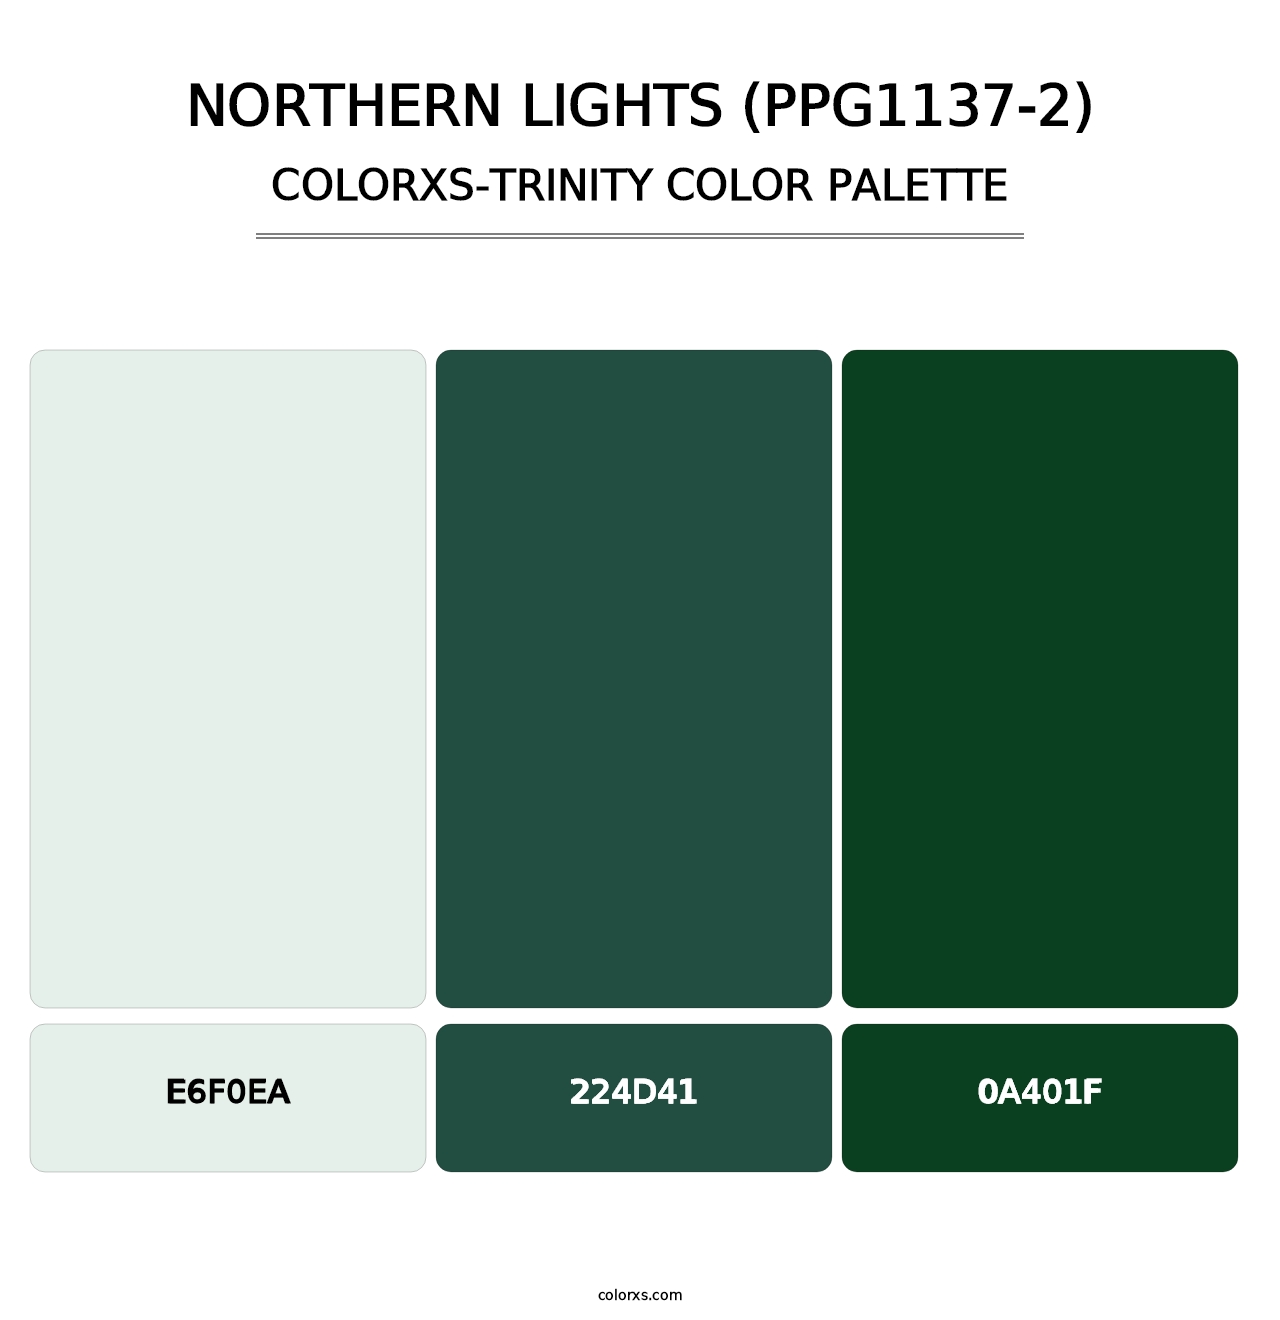 Northern Lights (PPG1137-2) - Colorxs Trinity Palette